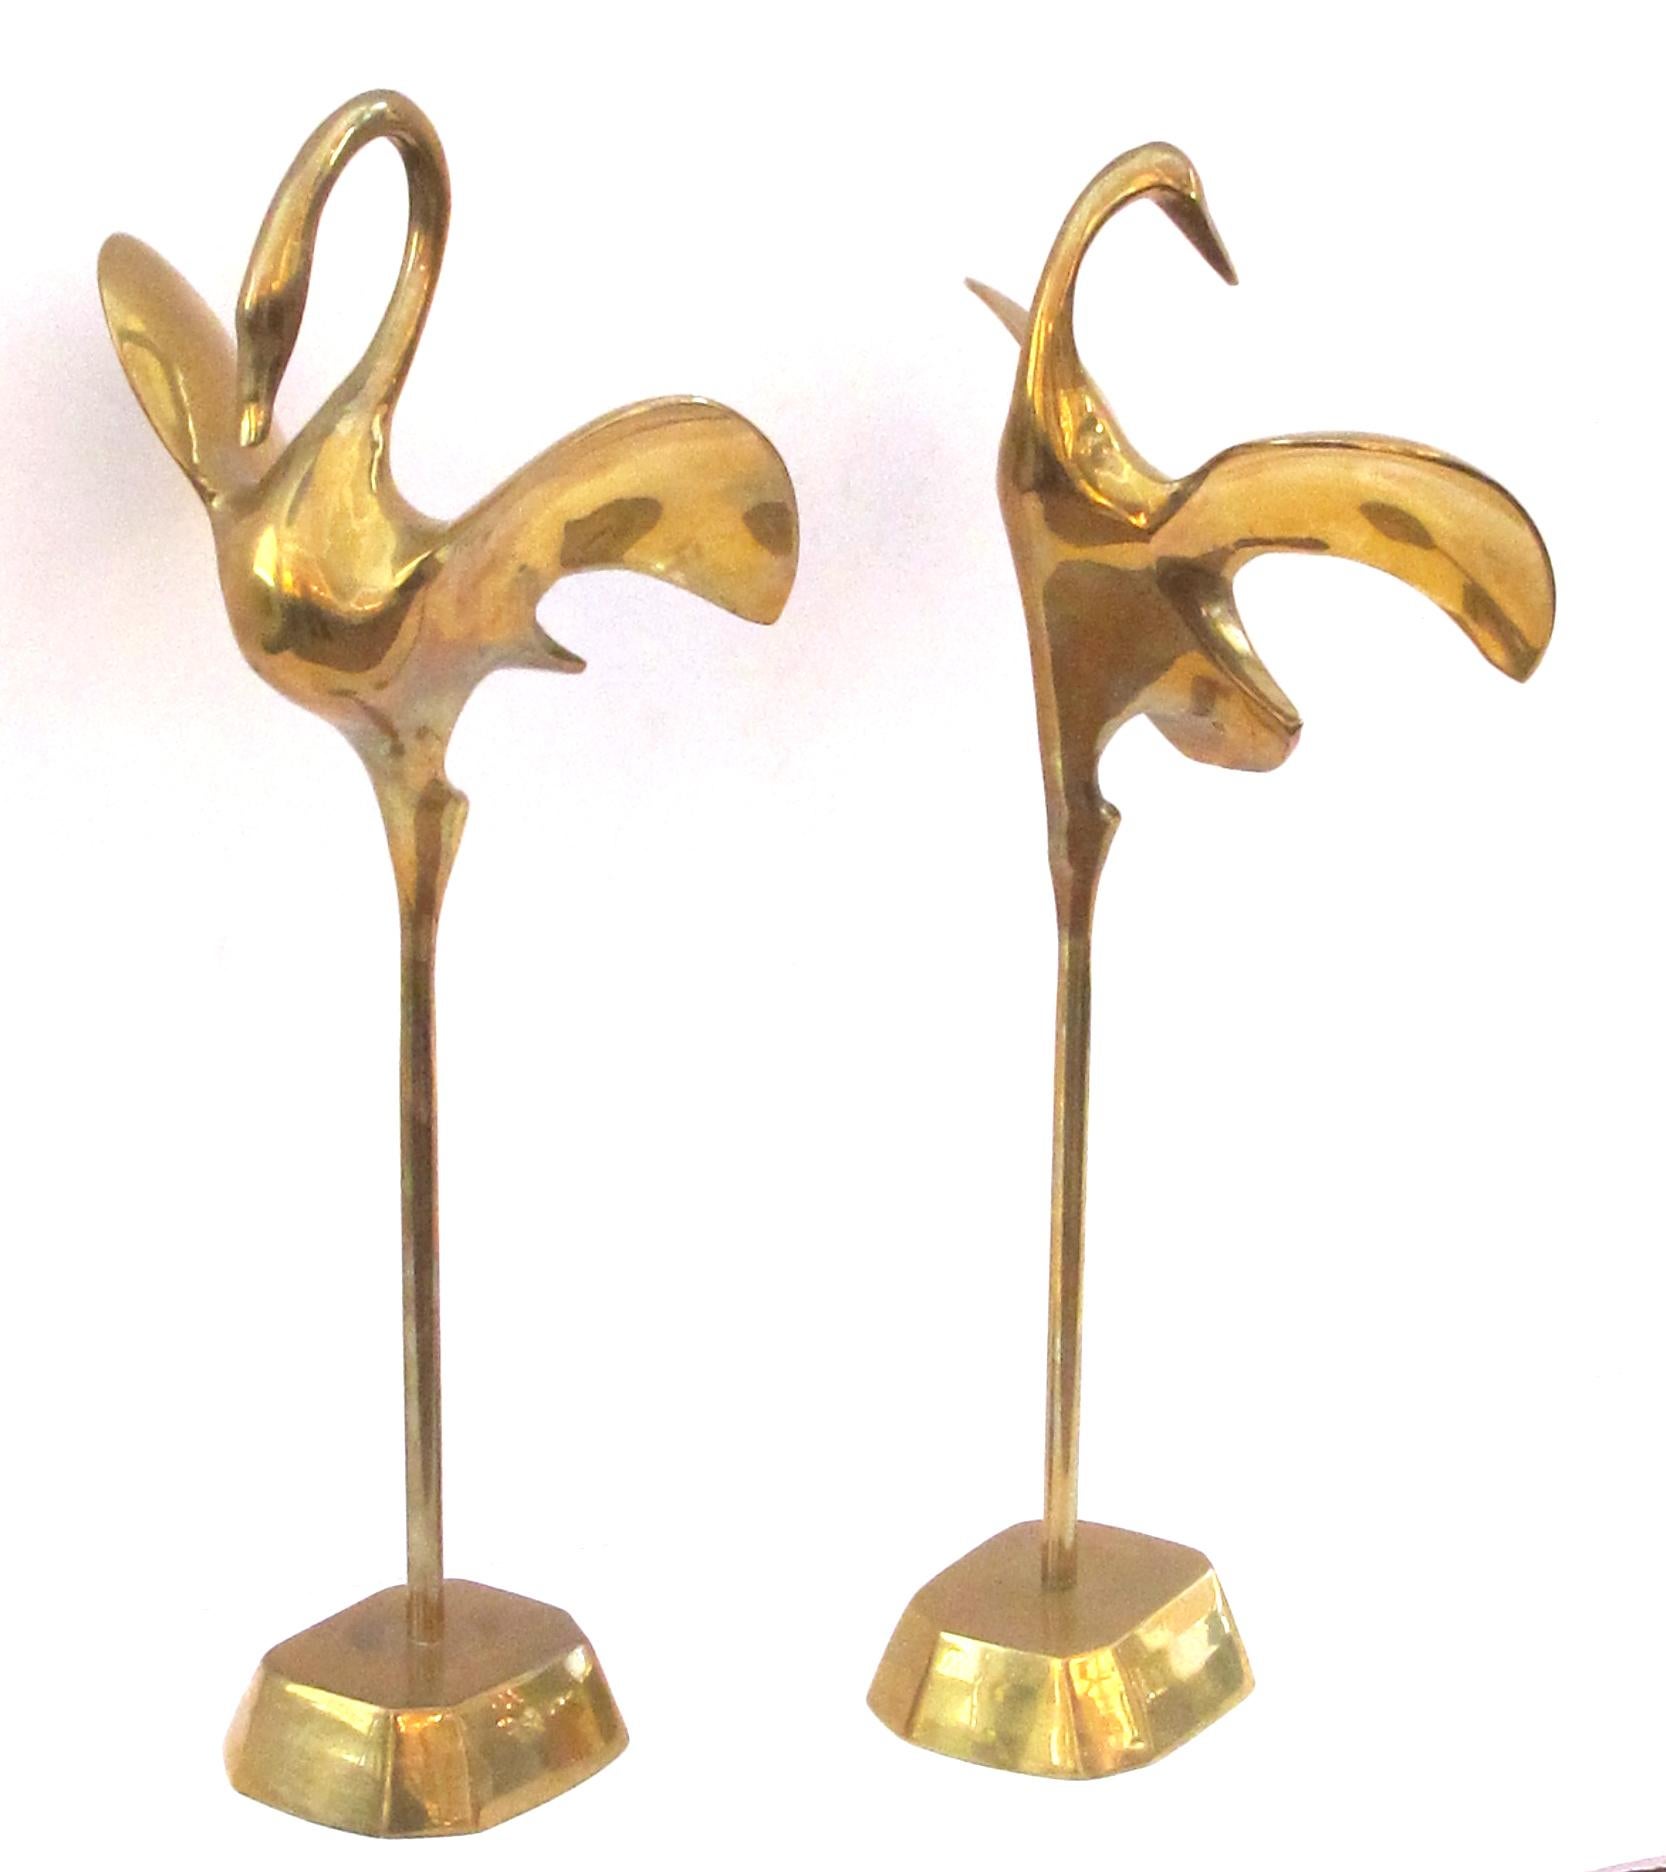 A Graceful Pair of Stylized Solid Brass Cranes 2